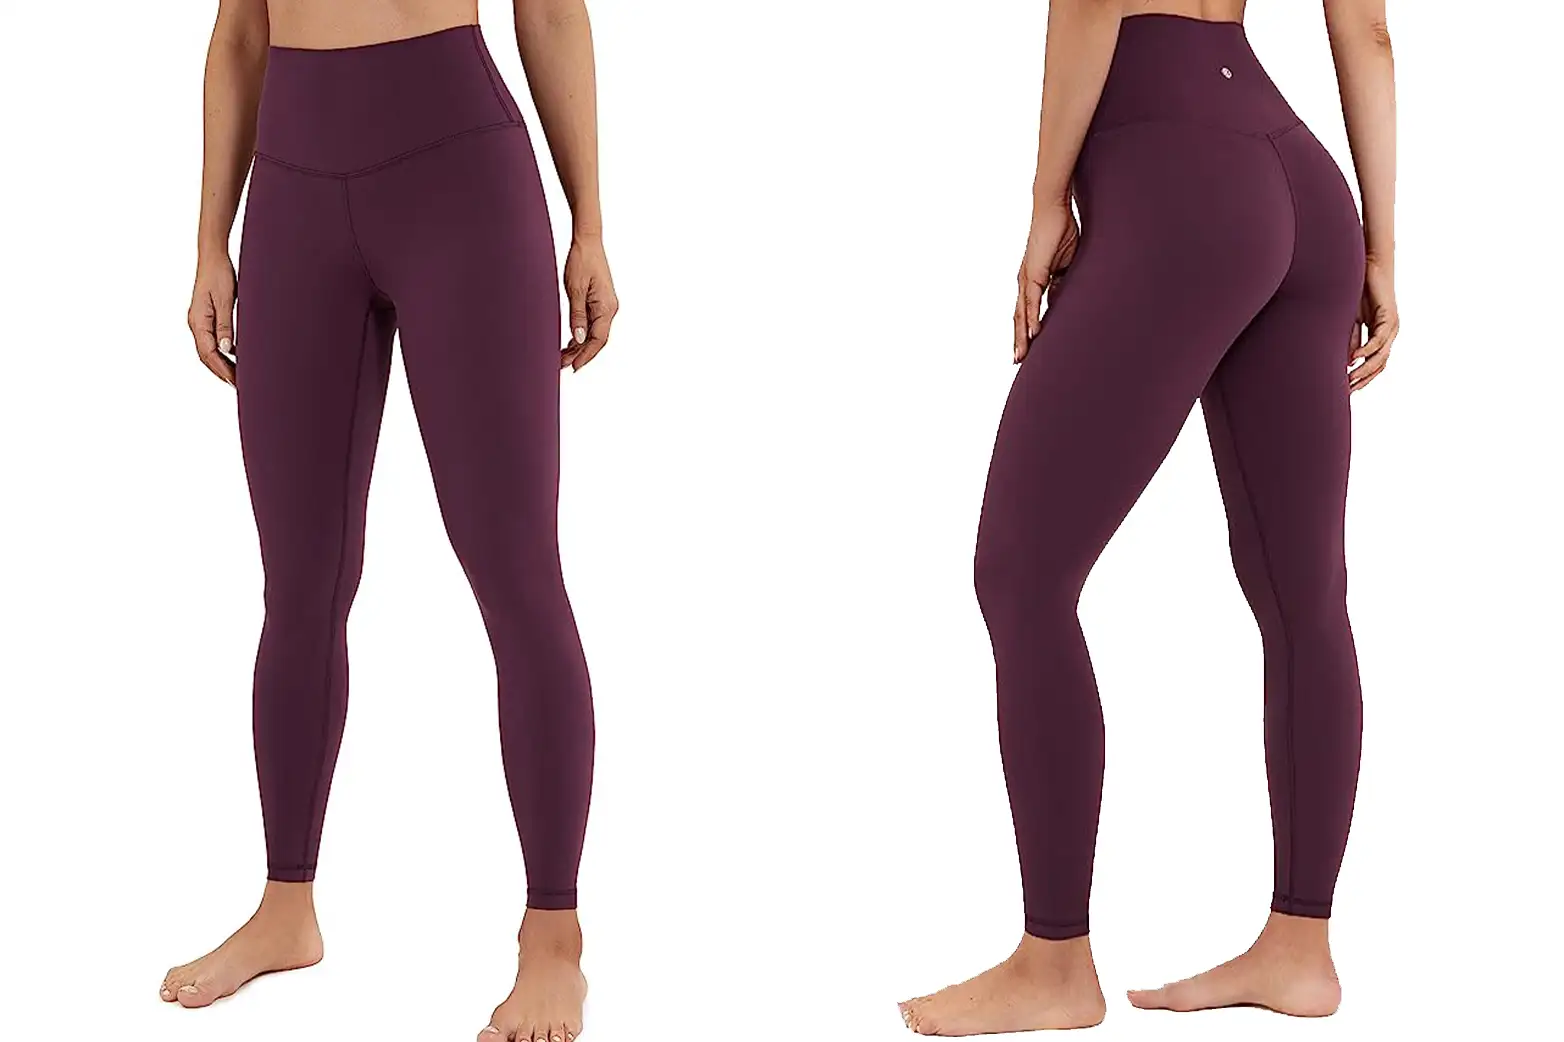 CRZ YOGA TRY ON HAUL  so affordable, new releases, must-haves